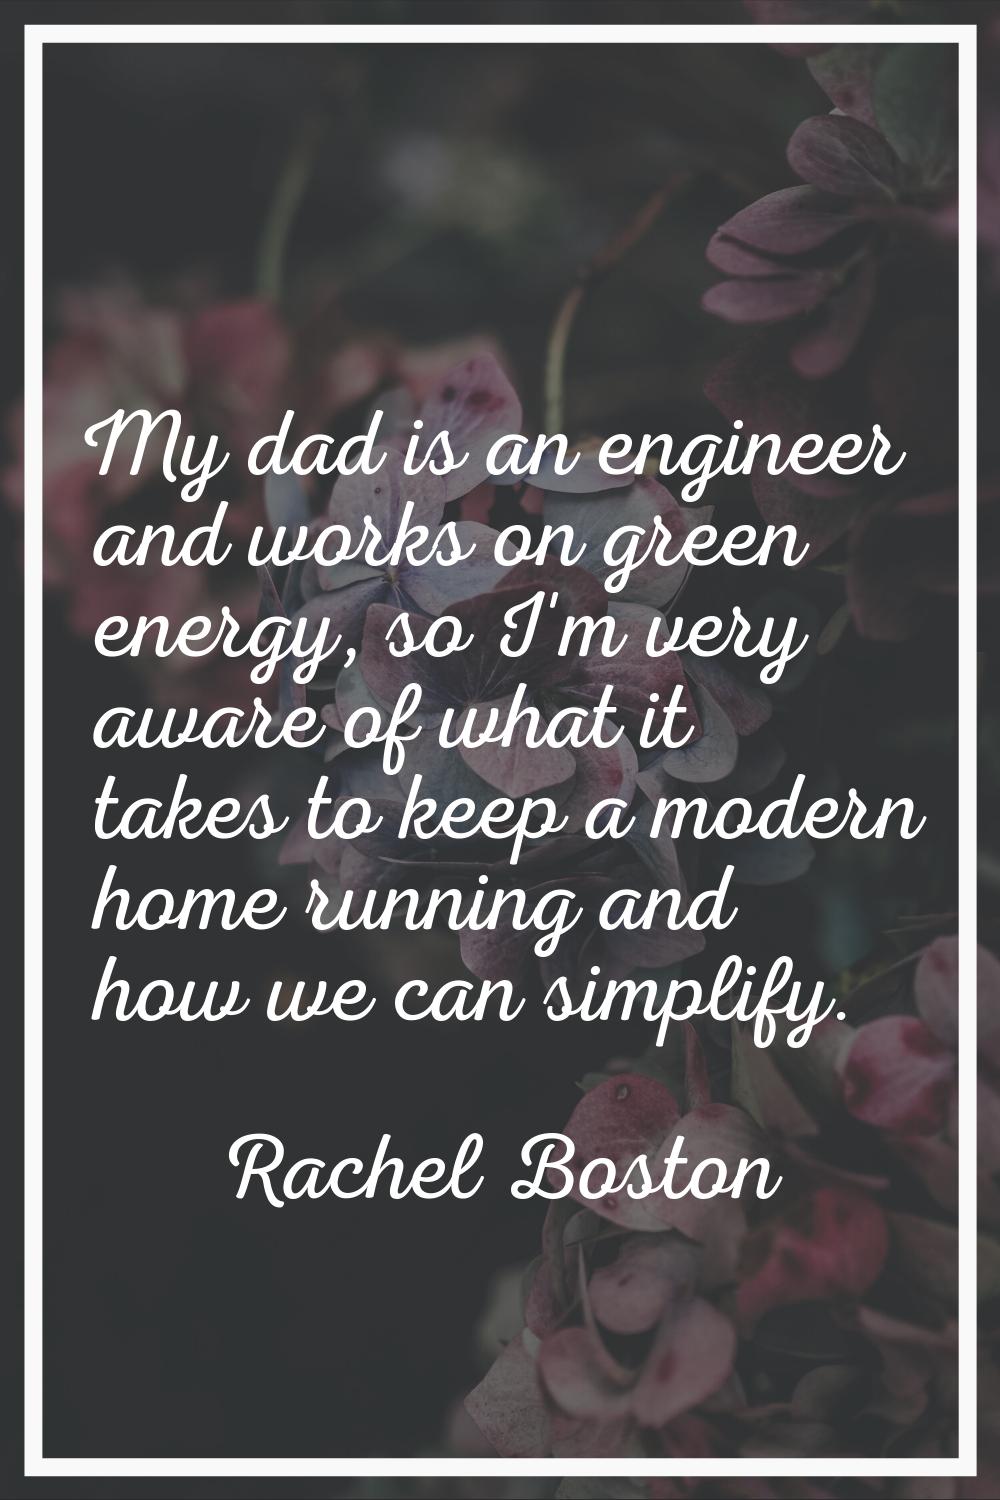 My dad is an engineer and works on green energy, so I'm very aware of what it takes to keep a moder